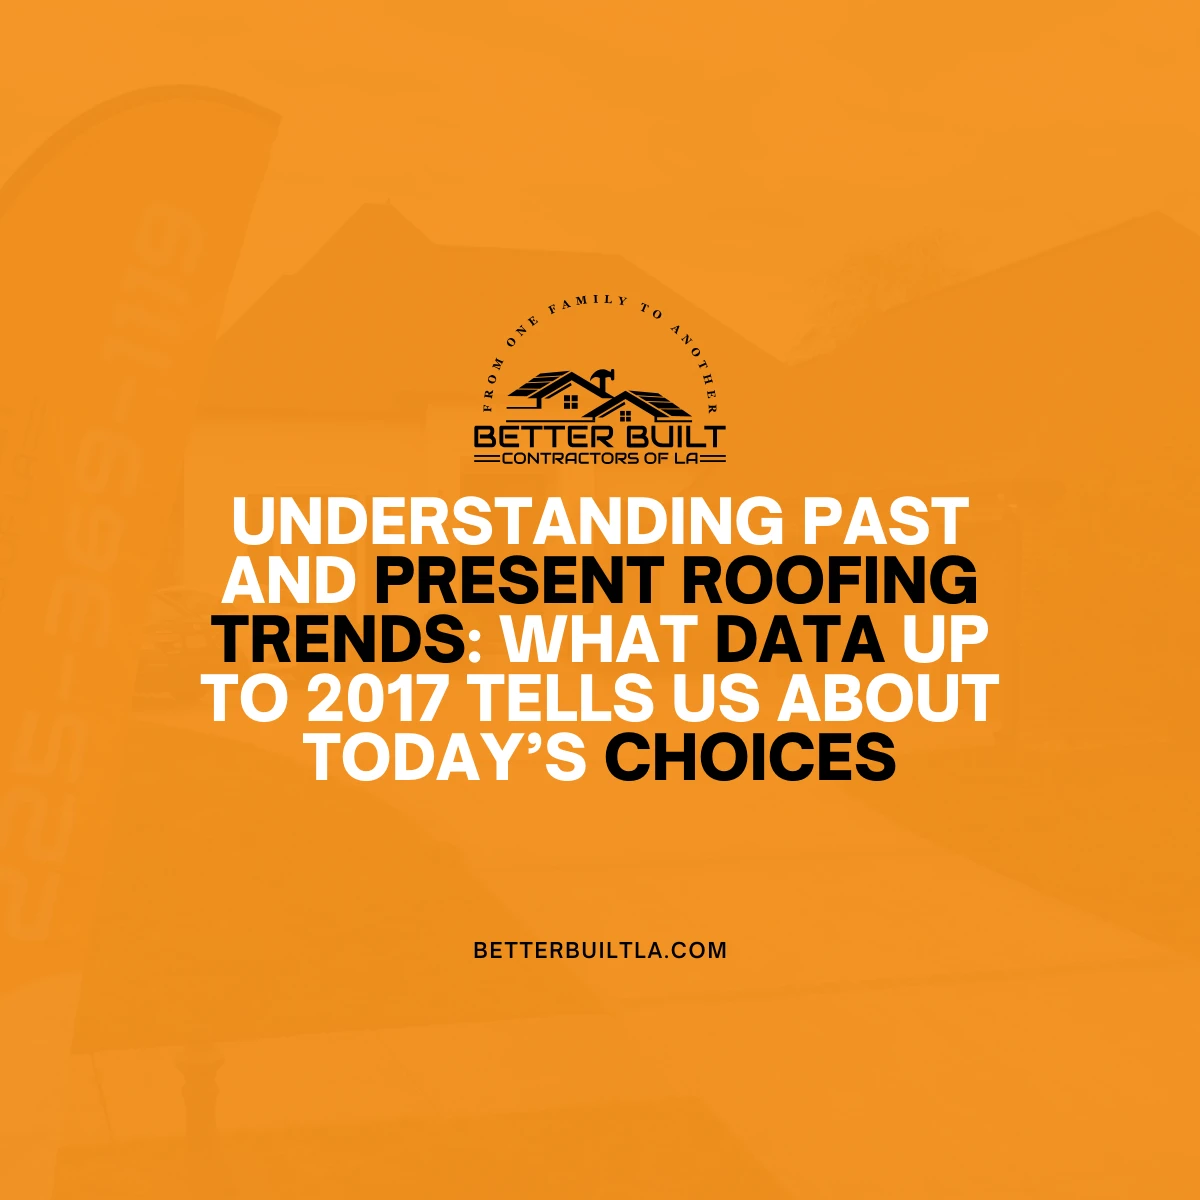 Understanding Past and Present Roofing Trends: What Data up to 2017 Tells Us About Today’s Choices